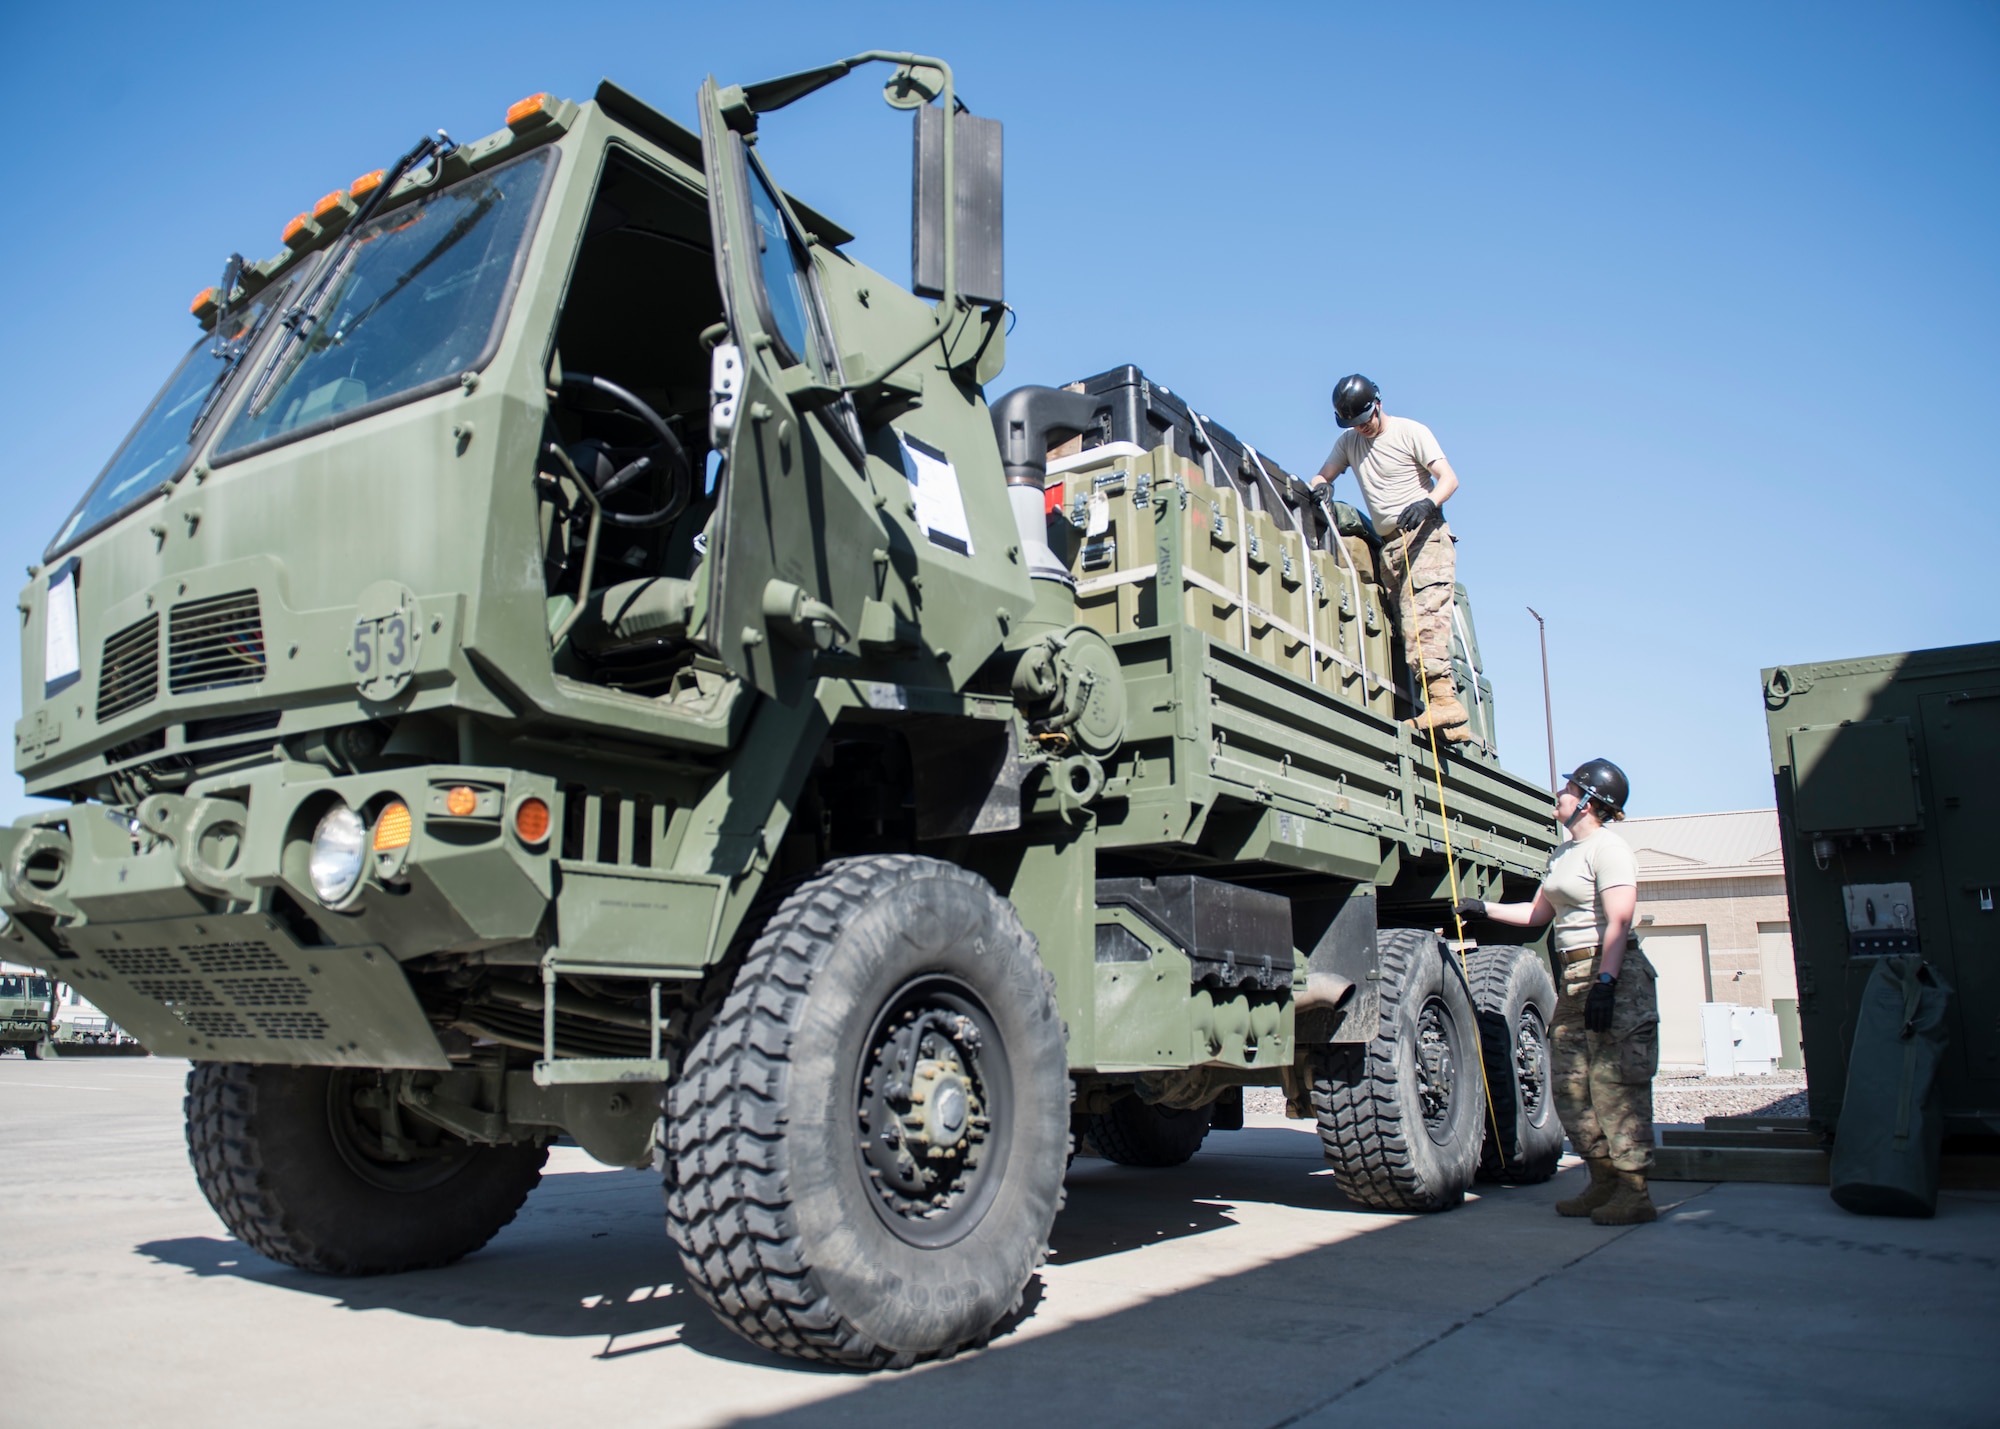 Airmen from the 726th Air Control Squadron conduct a height inspiection on a Medium Tactical Vehicle in preparation for an execise July 11, 2019, at Mountain Home Air Force Base, Idaho. Inspections are conducted throught the packing process to ensure vehicels adhere to regualtions and supplies are secure. (U.S. Air Force photo by Senior Airman Tyrell Hall)